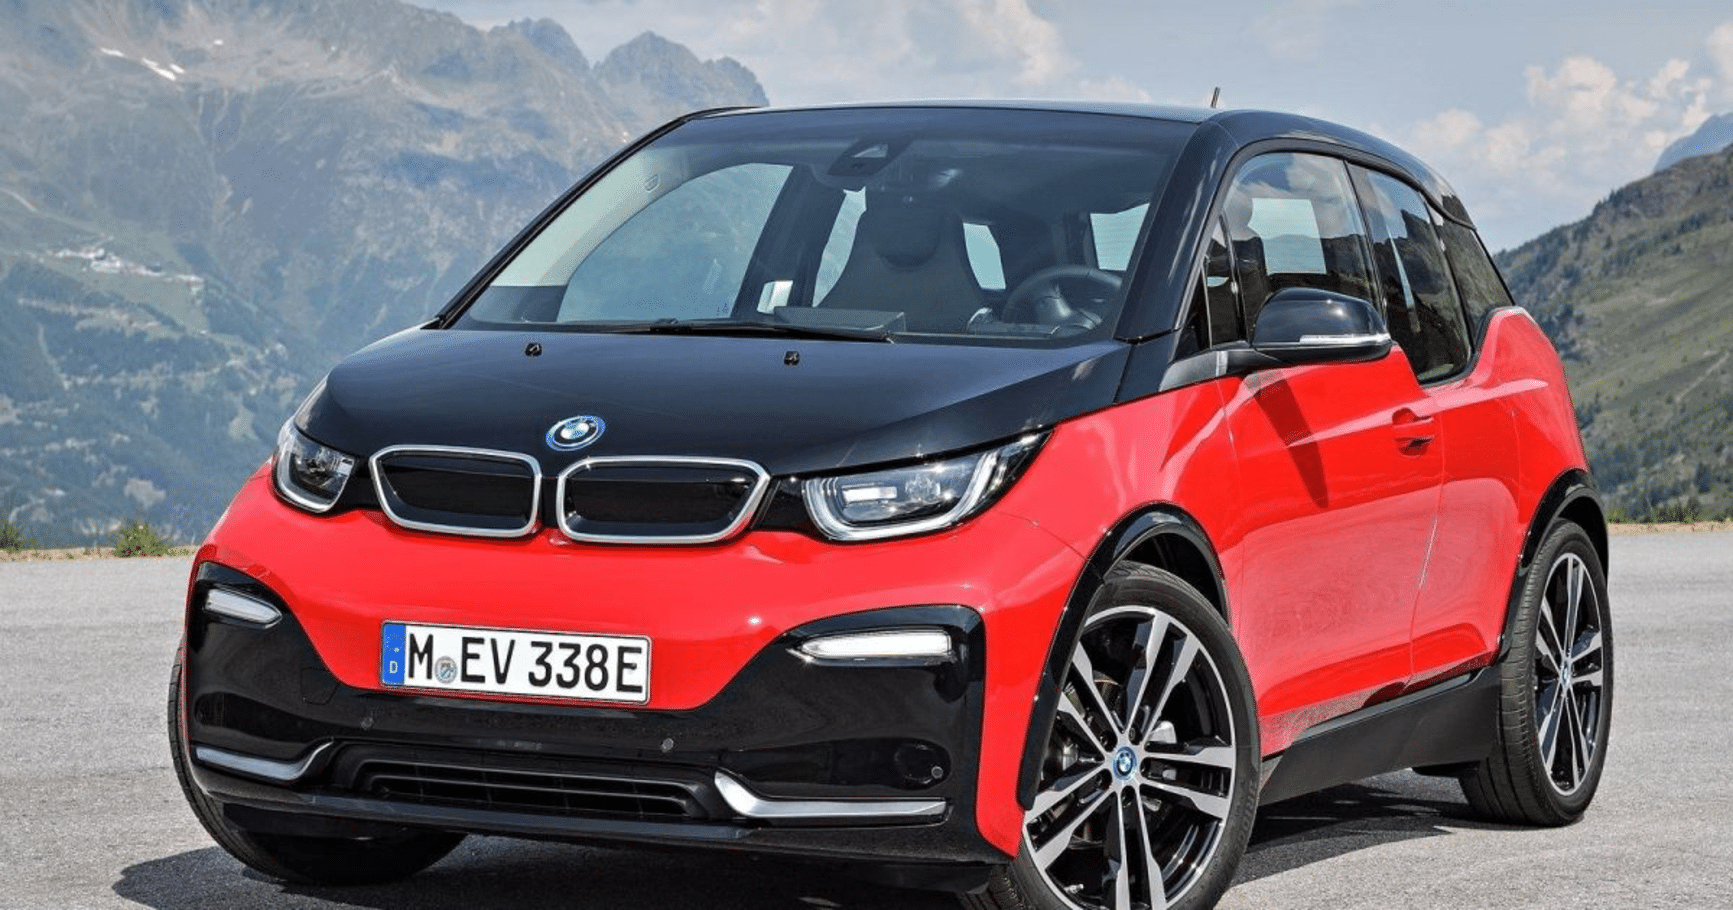 BMW i3 Successor to Have a More Conservative Design, Says BMW Development Boss